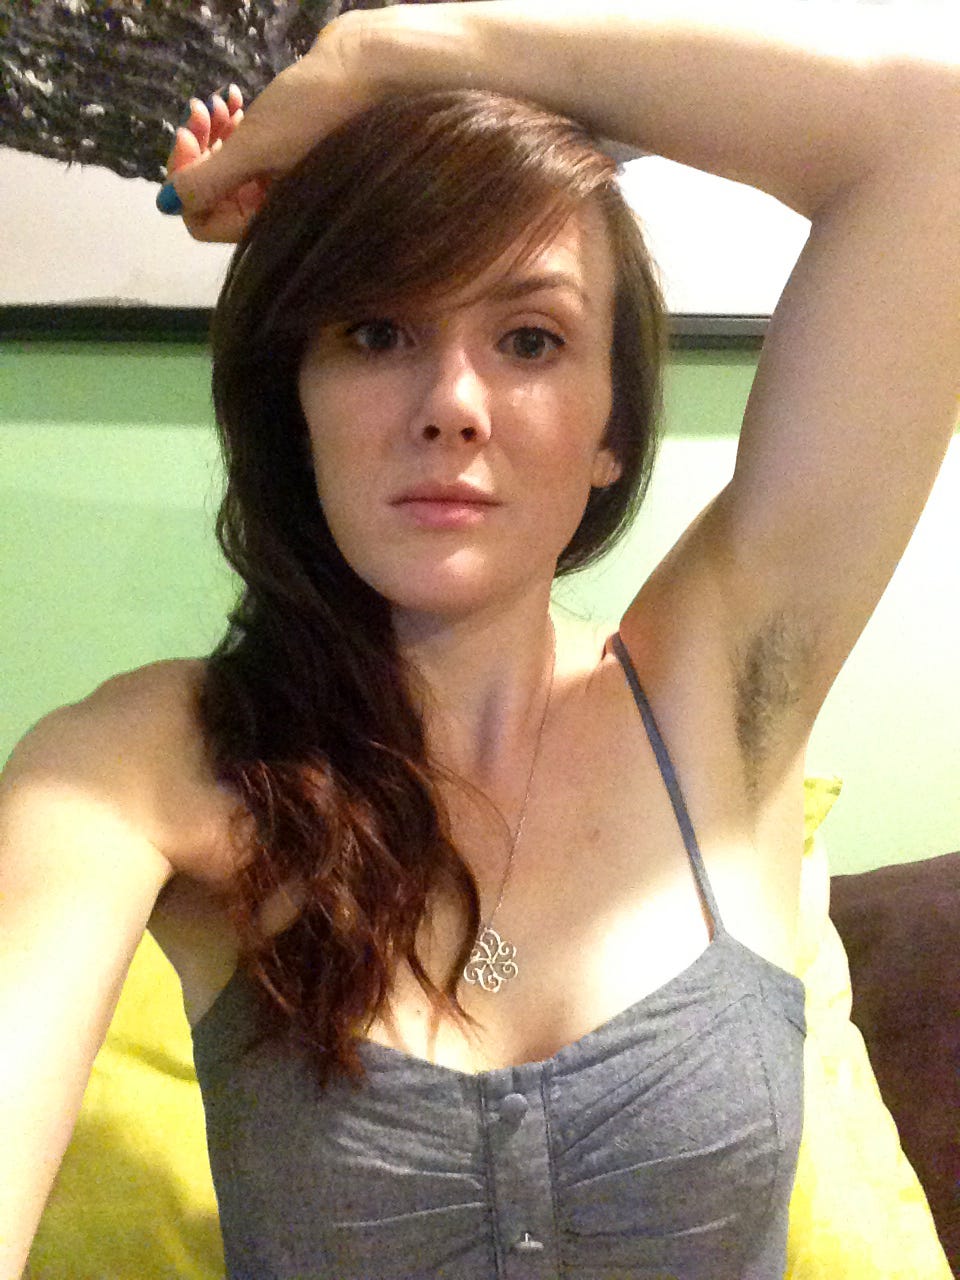 amit kliger recommends hairy armpit teen girl pic